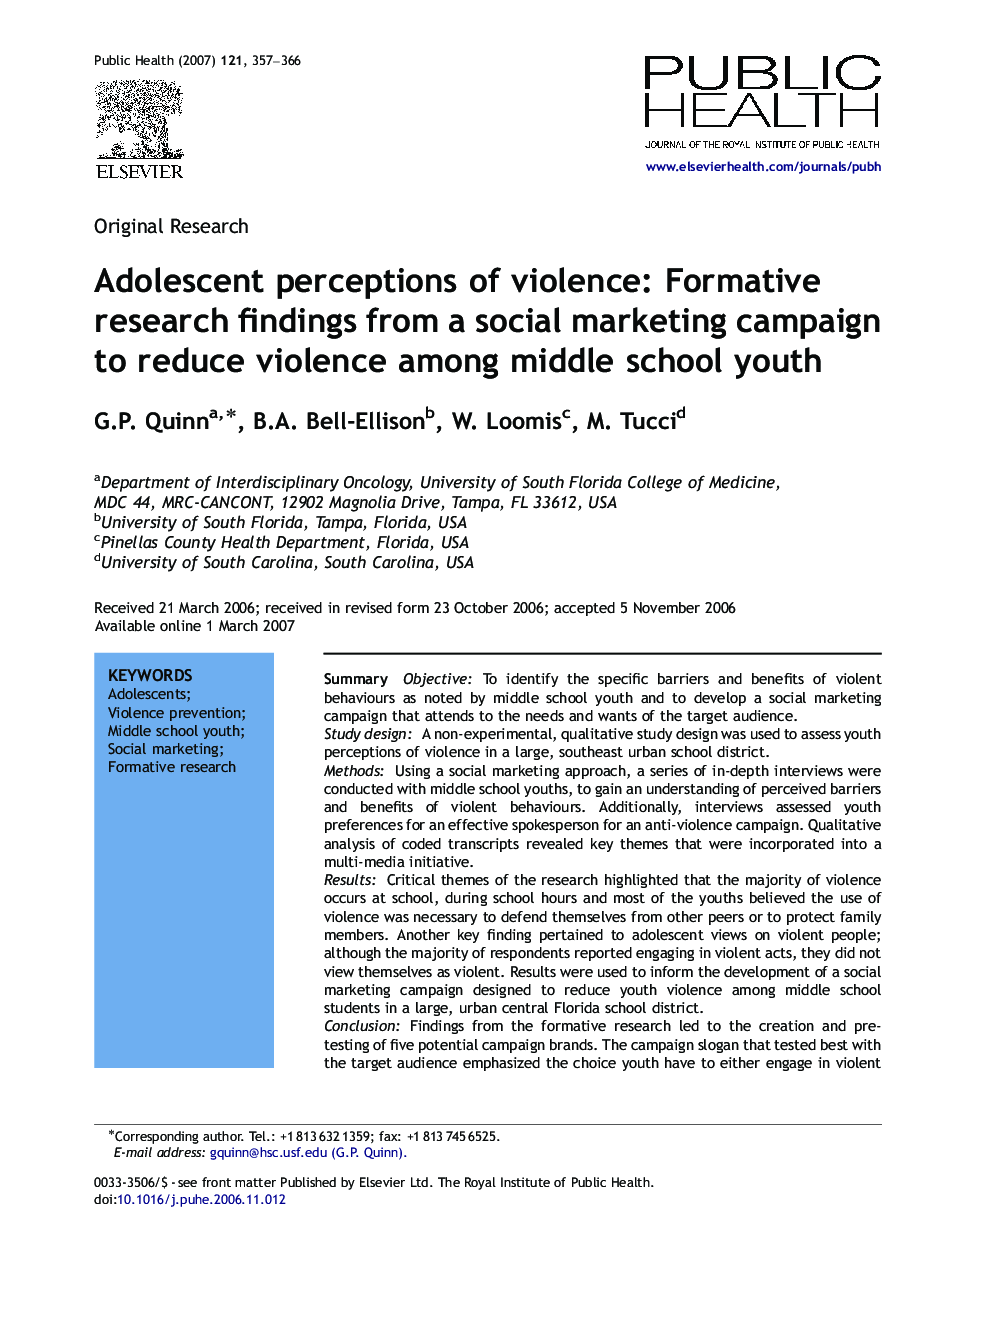 Adolescent perceptions of violence: Formative research findings from a social marketing campaign to reduce violence among middle school youth